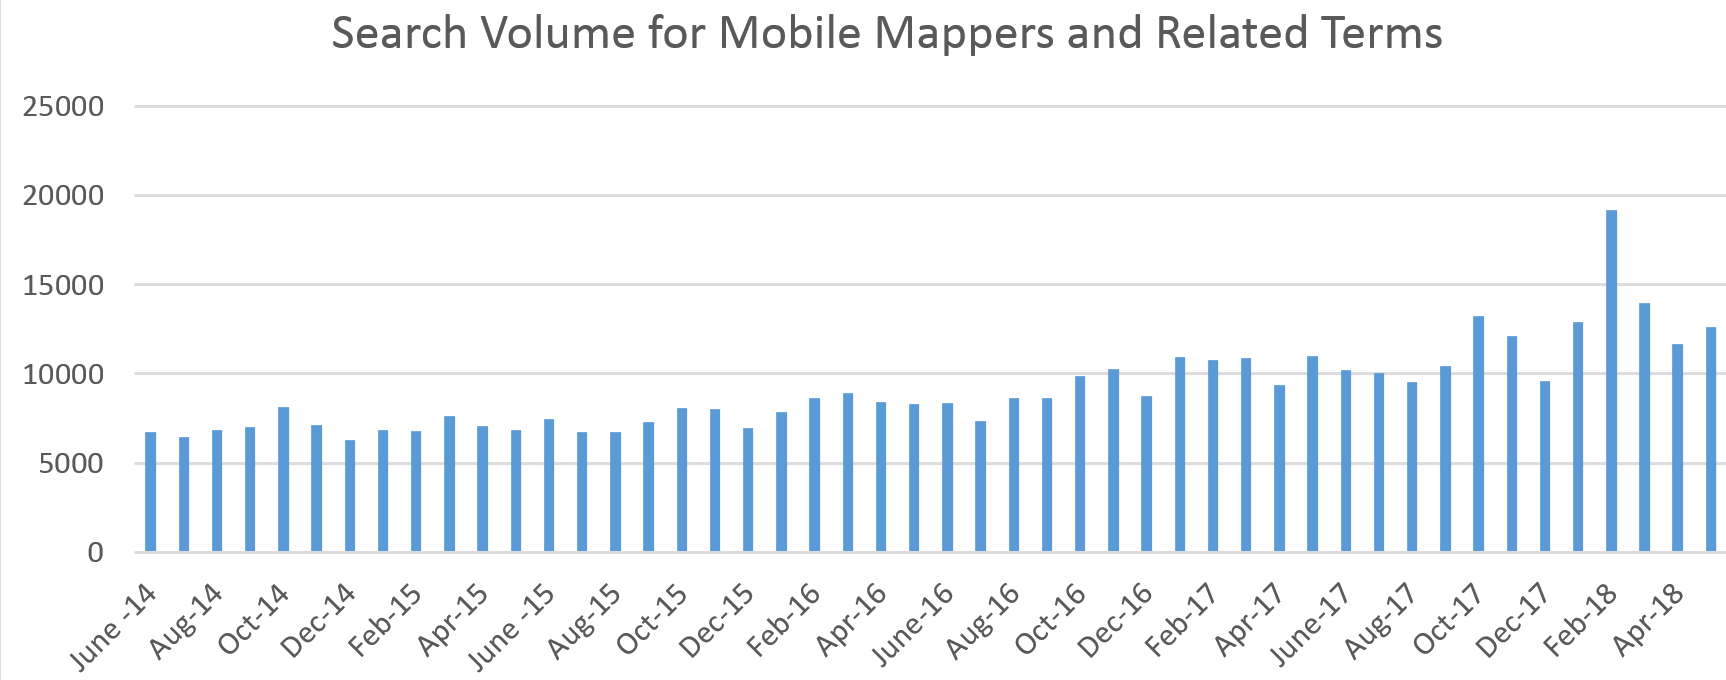 Google search volume for ‘mobile mappers’ and related terms